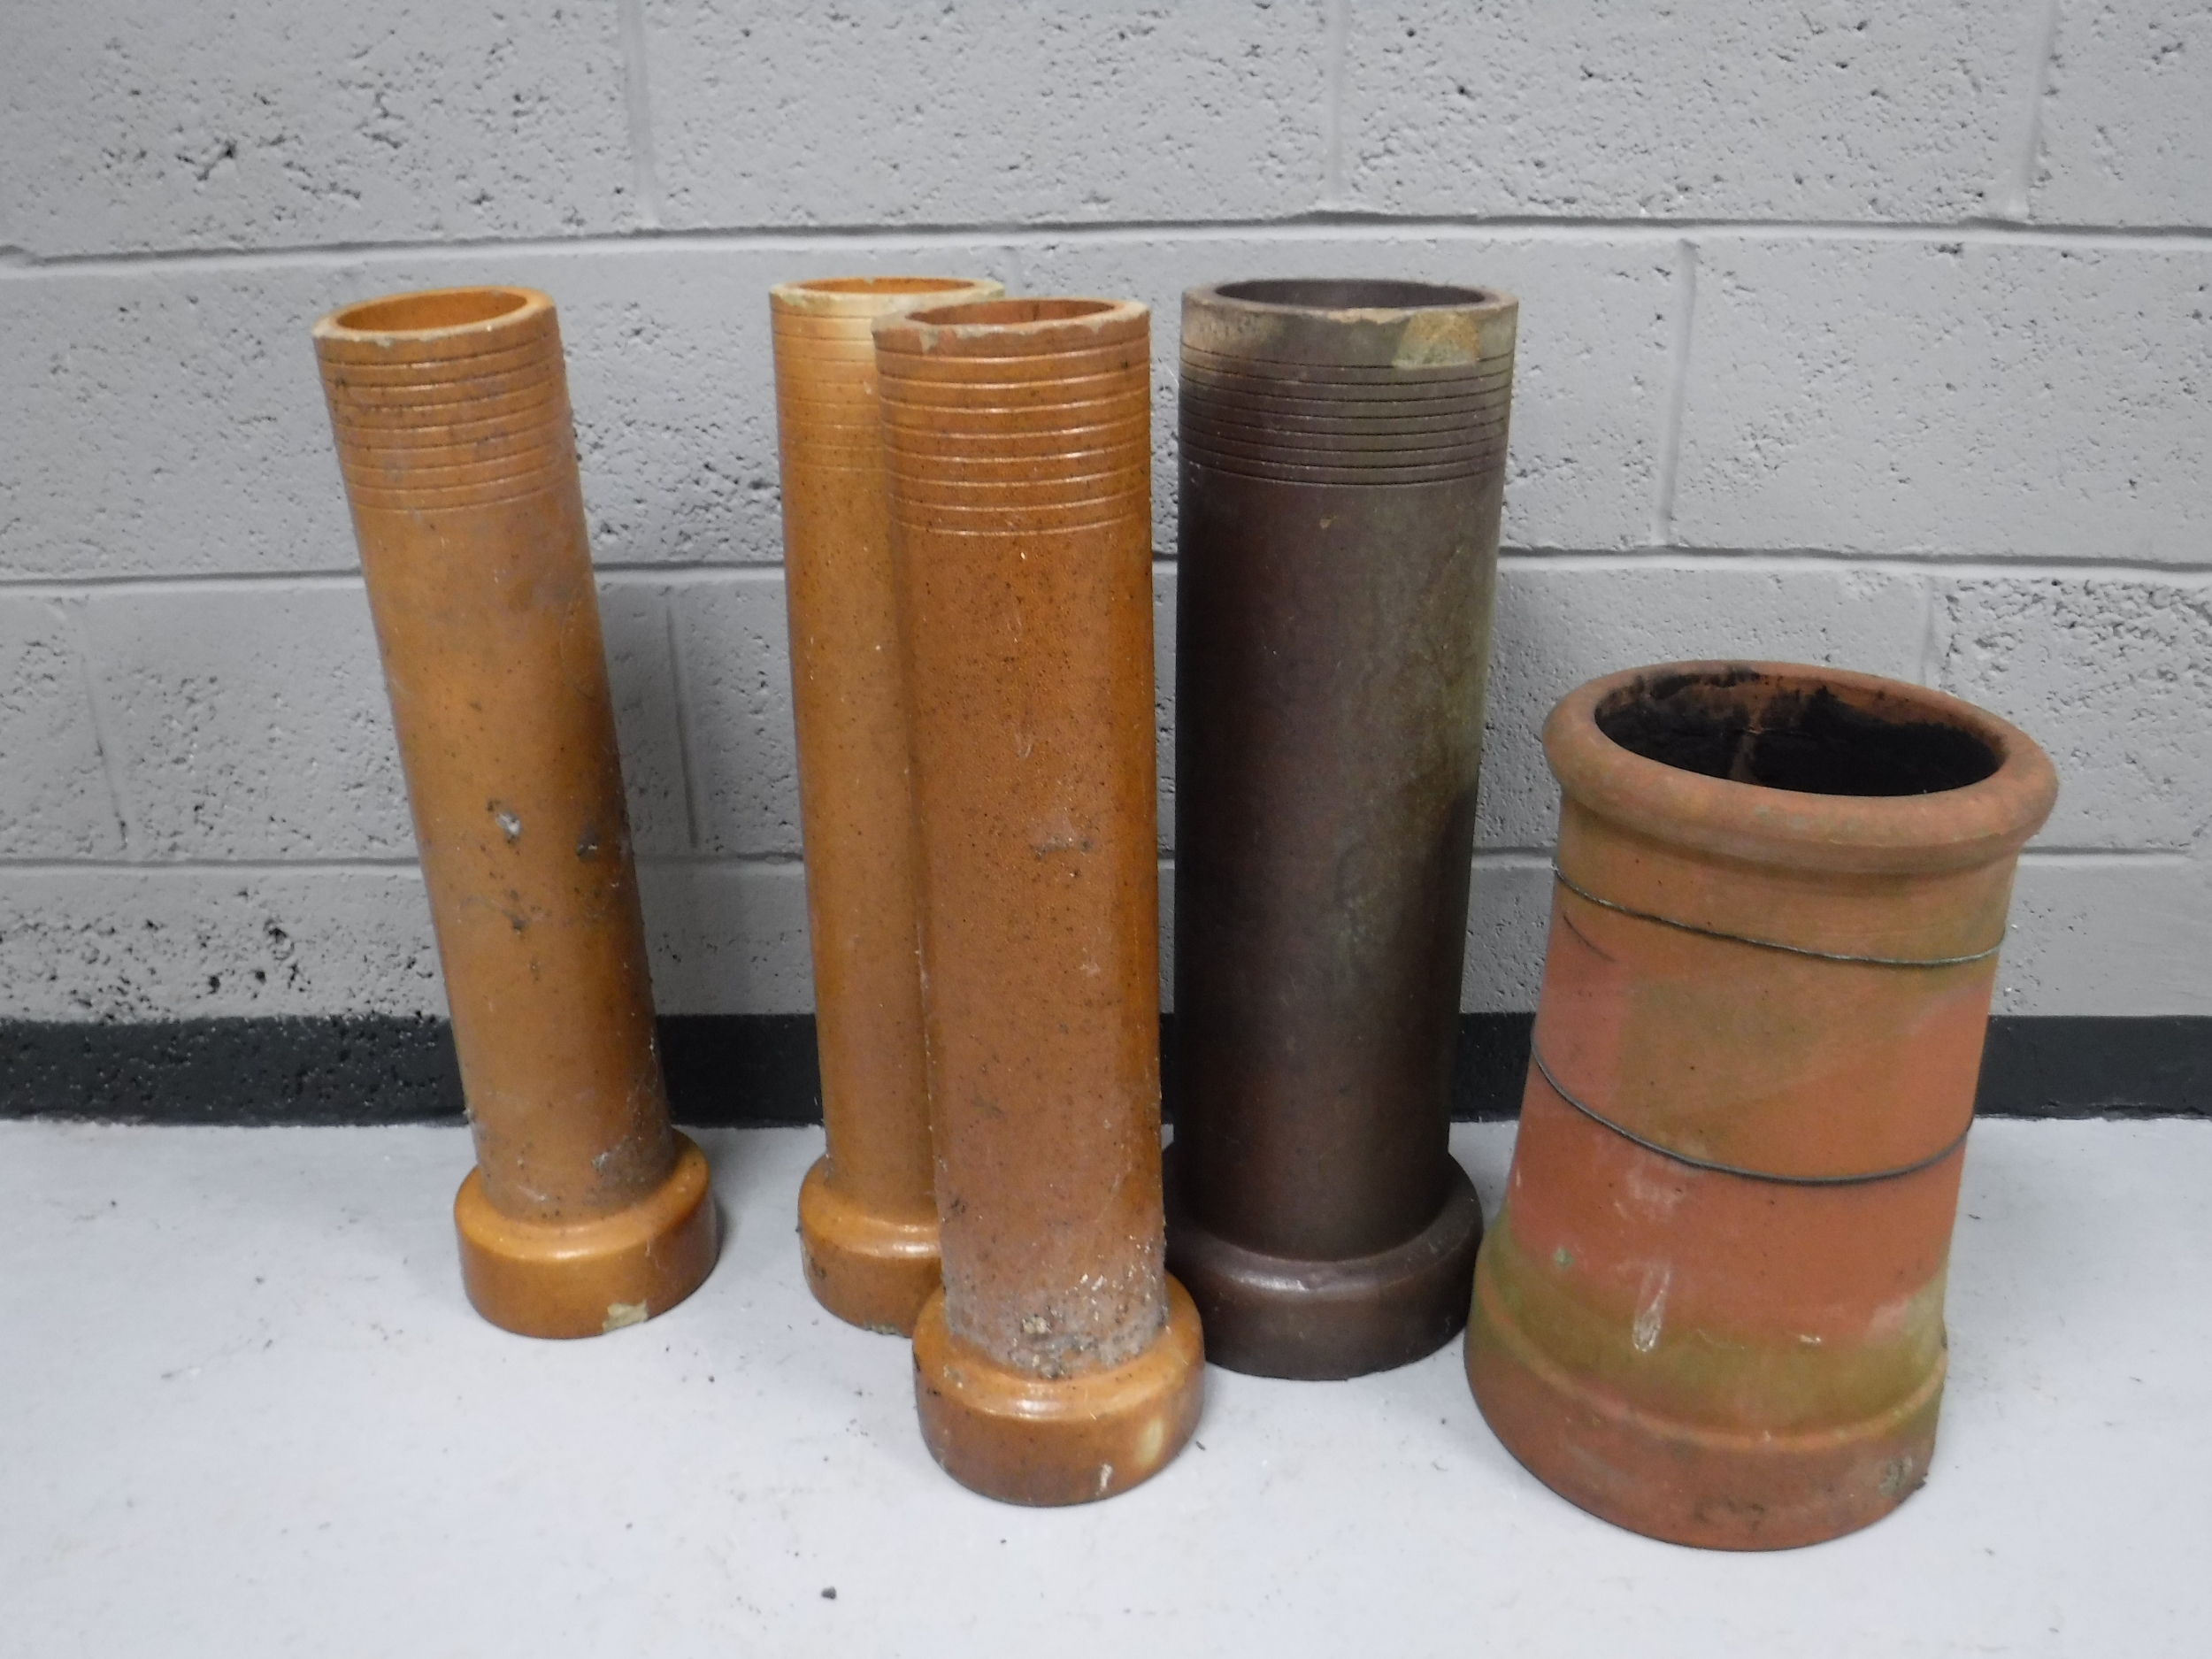 One chimney pot and four ground pipes